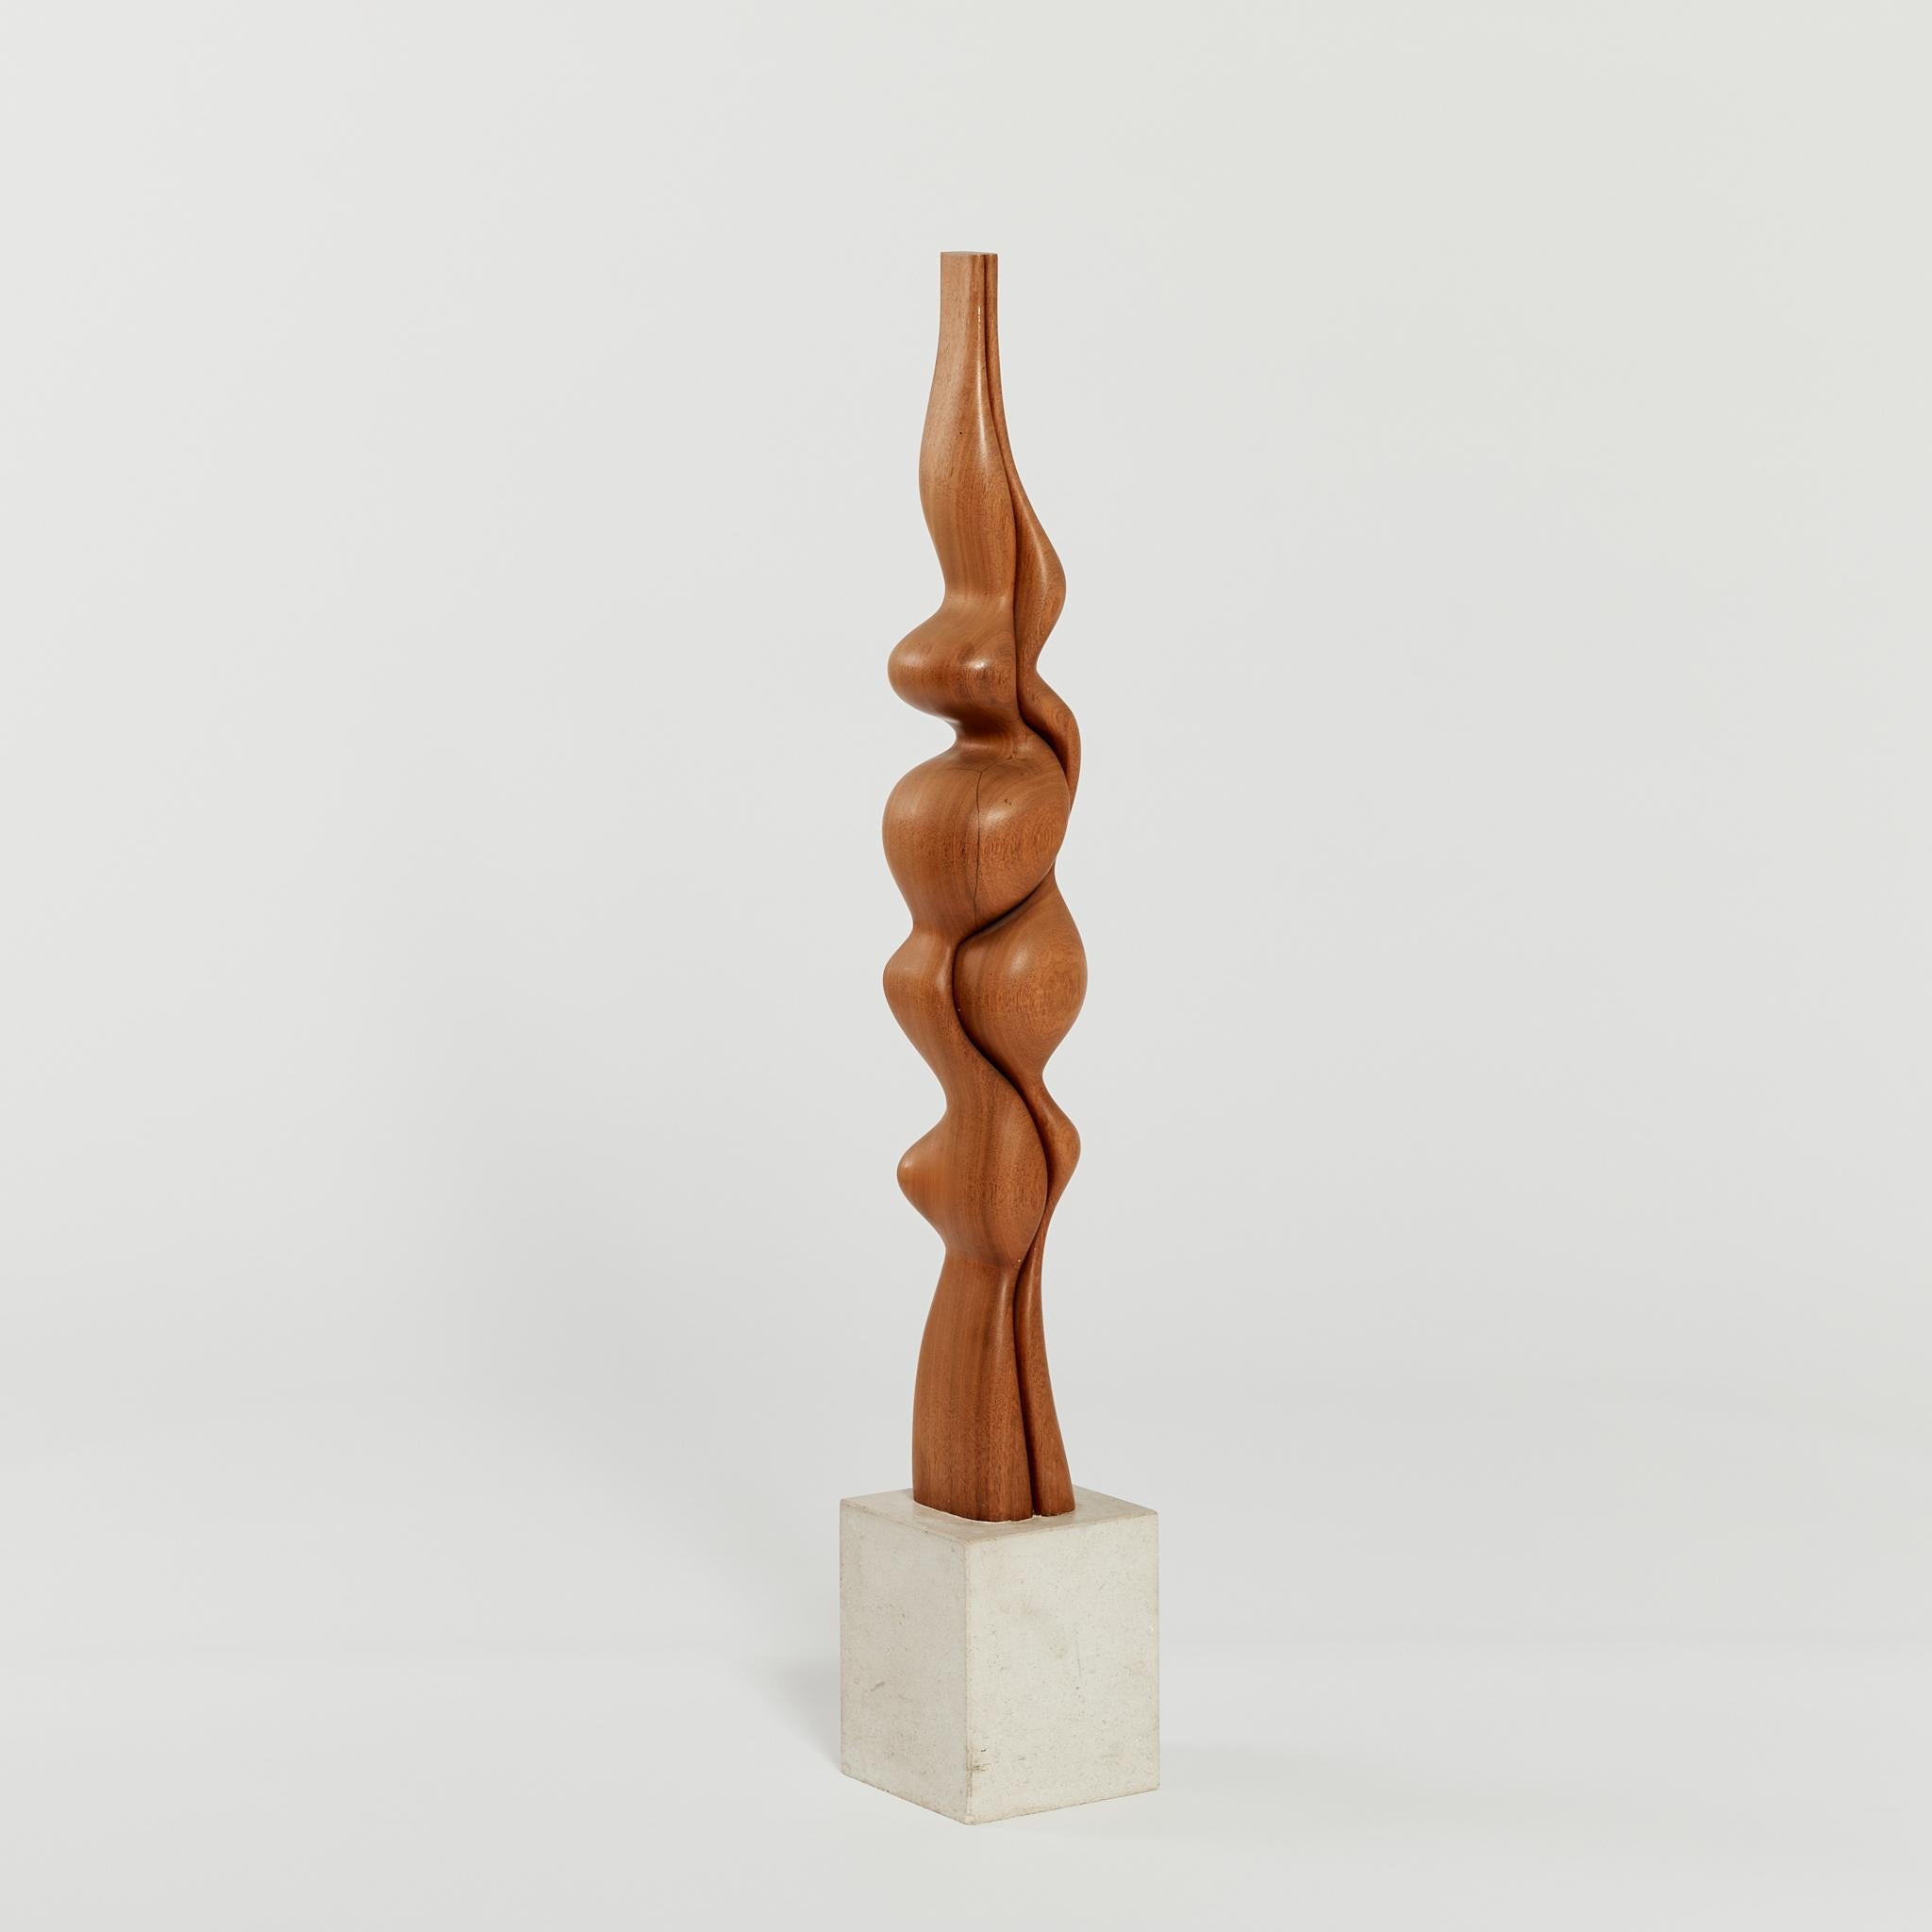 Organic Modern Tall Biomorphic Wood Floor Sculpture with Concrete Plinth